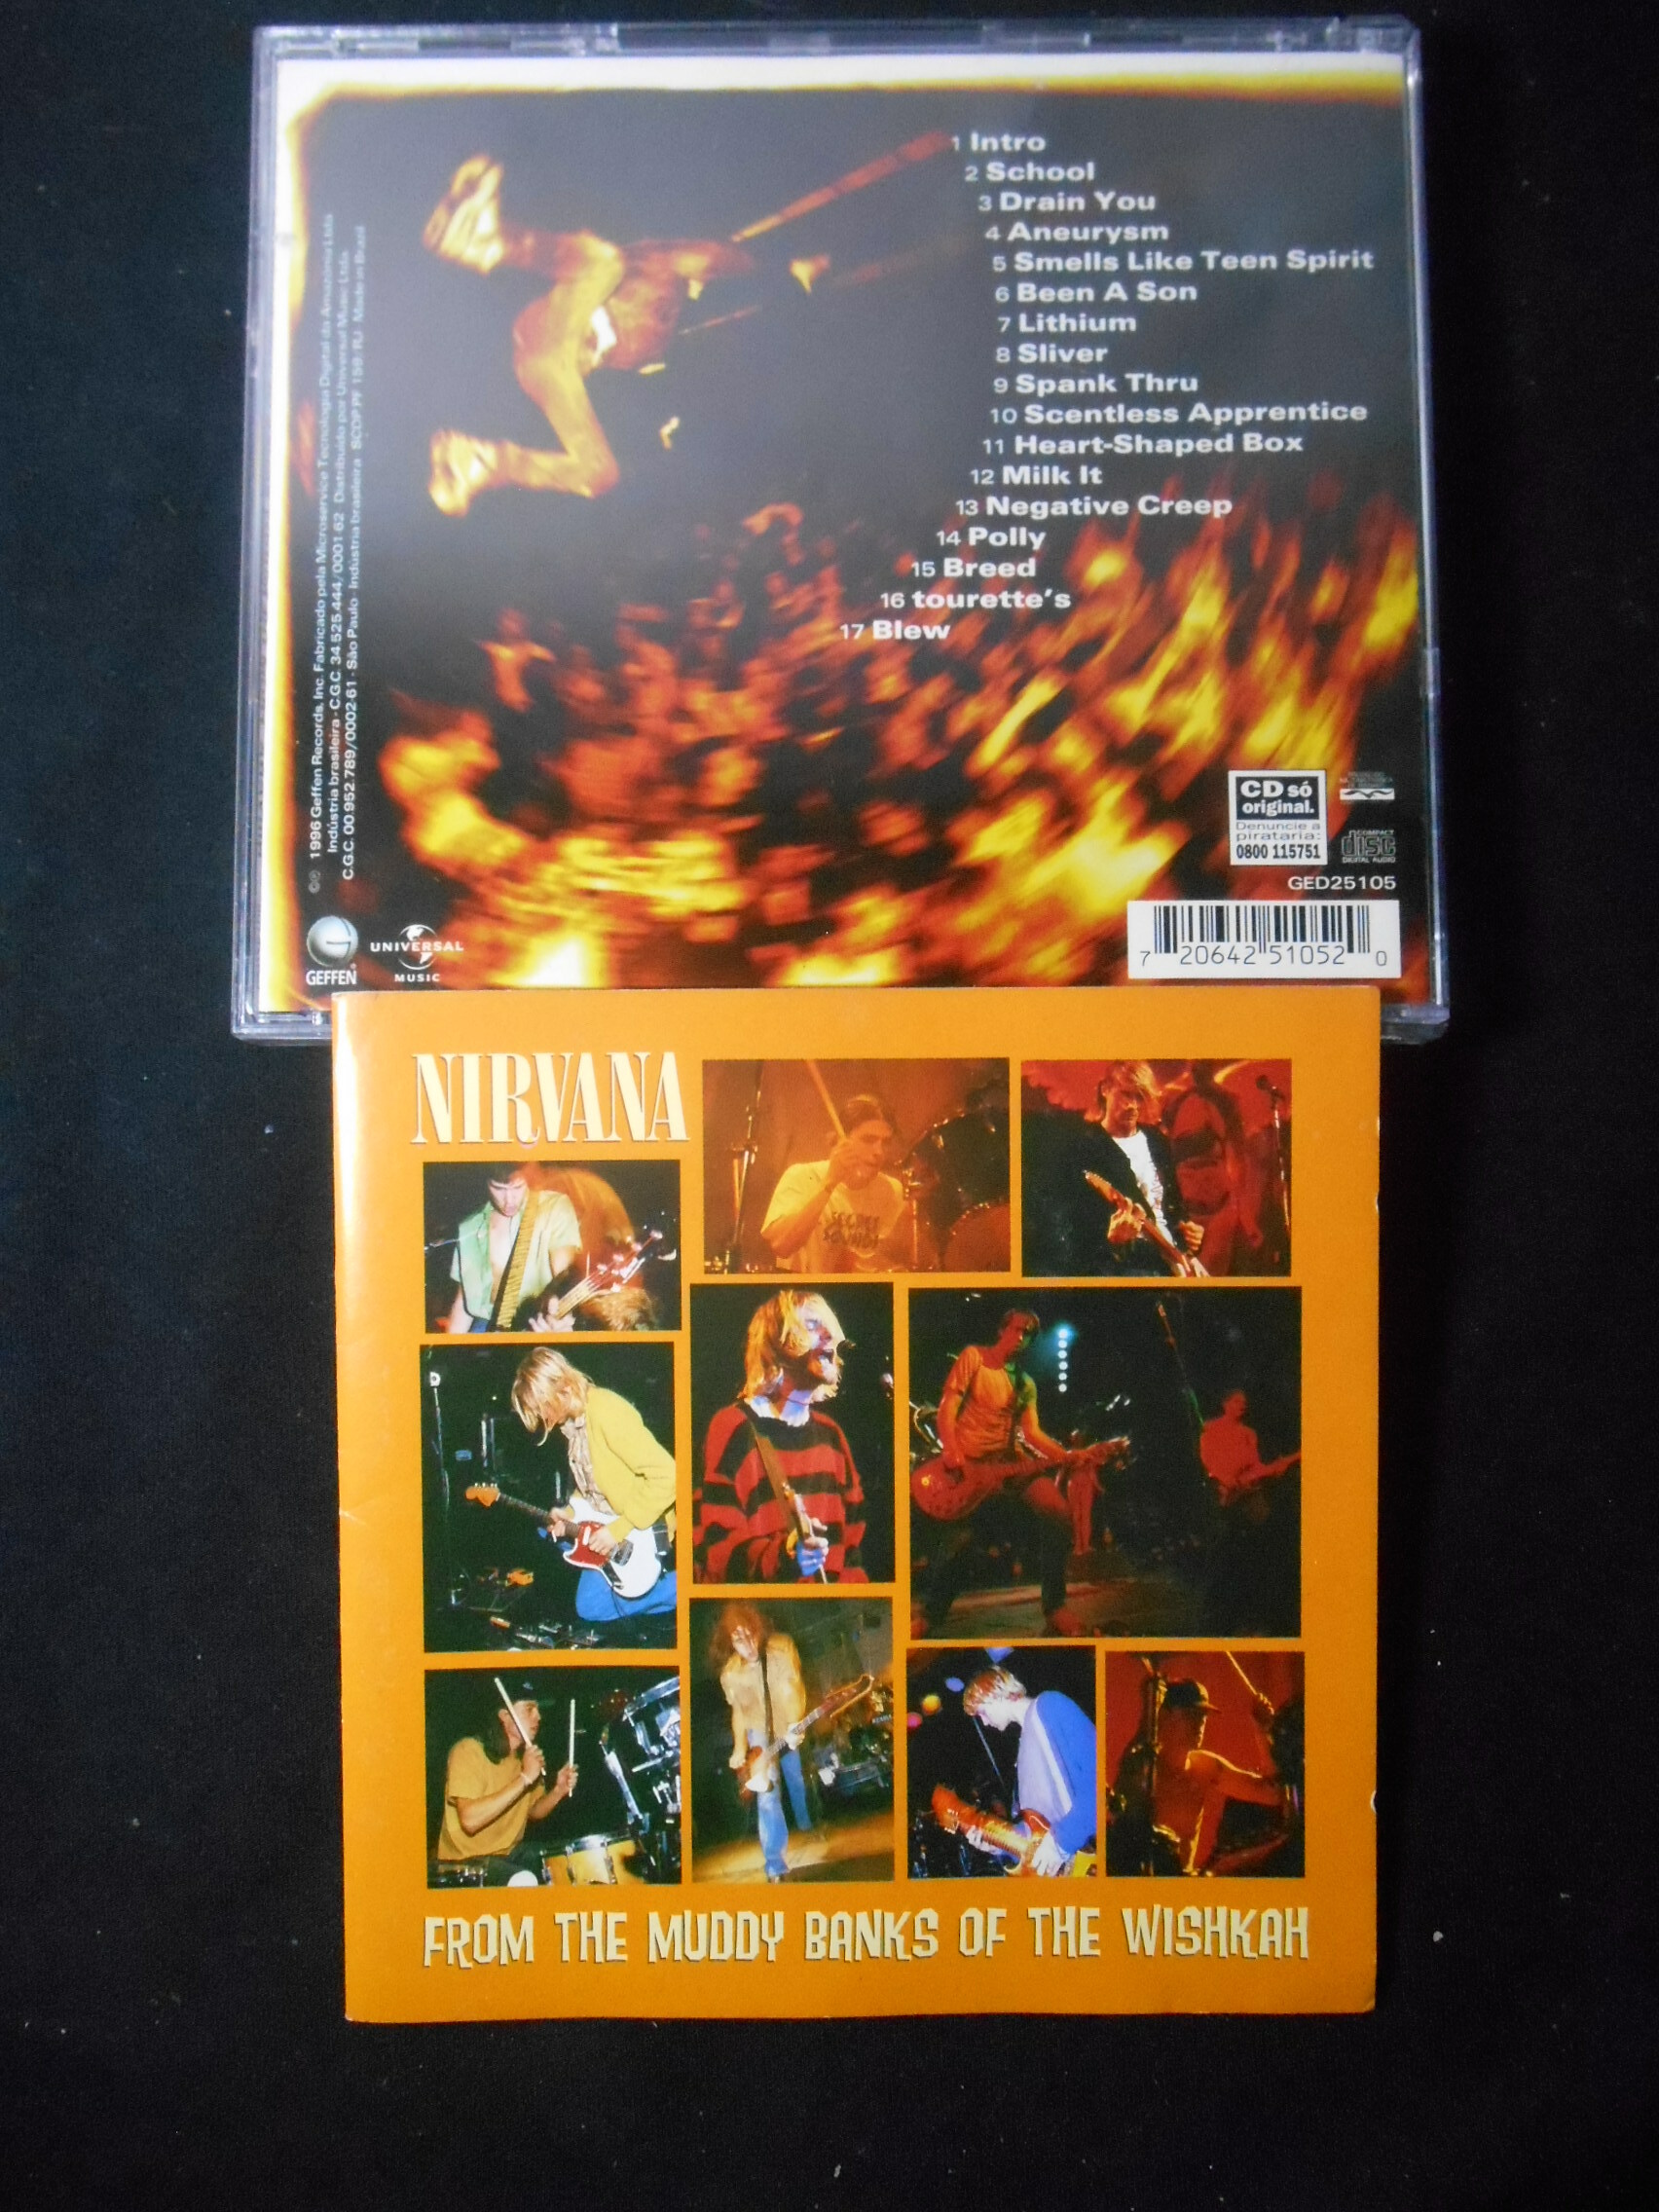 CD - Nirvana - From The Muddy Banks Of The Wishkah